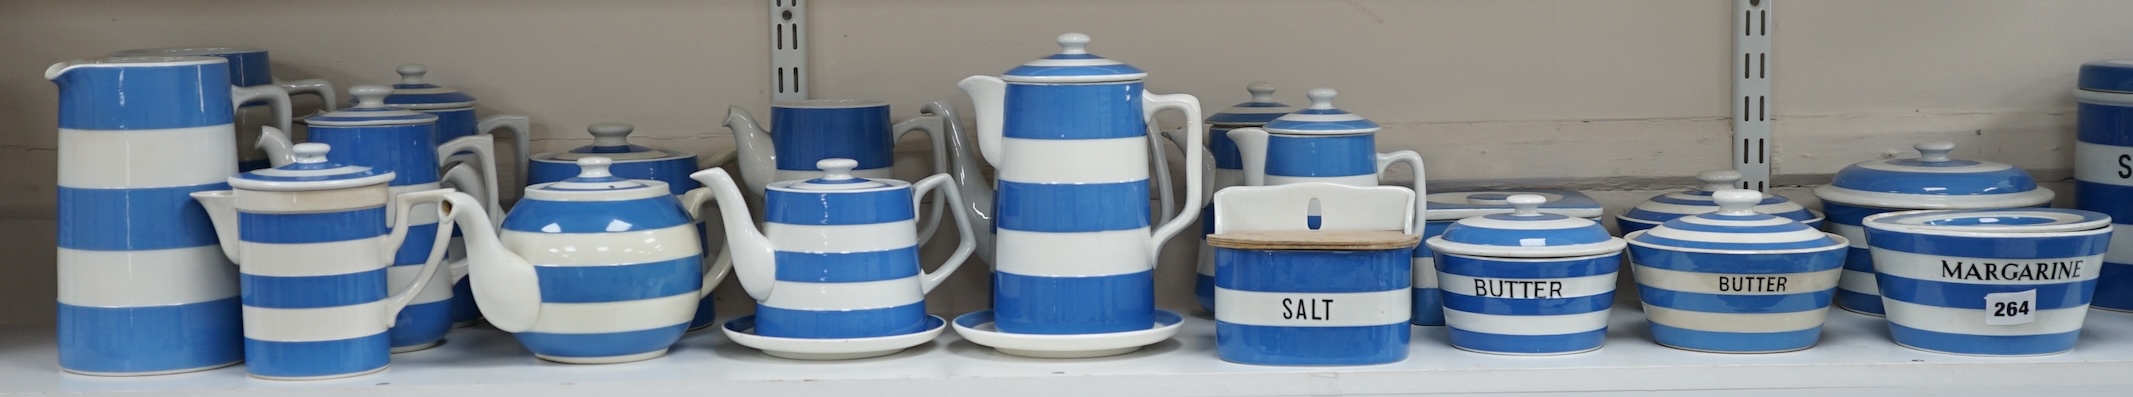 T.G.Green Cornish Kitchenware, eleven tea, coffee and hot water pots, two jugs, a salt pot, five Butter, Lard and Margarine lidded jars and one unnamed square jar, largest 20cm high, mixed marks. Condition - poor, fair a